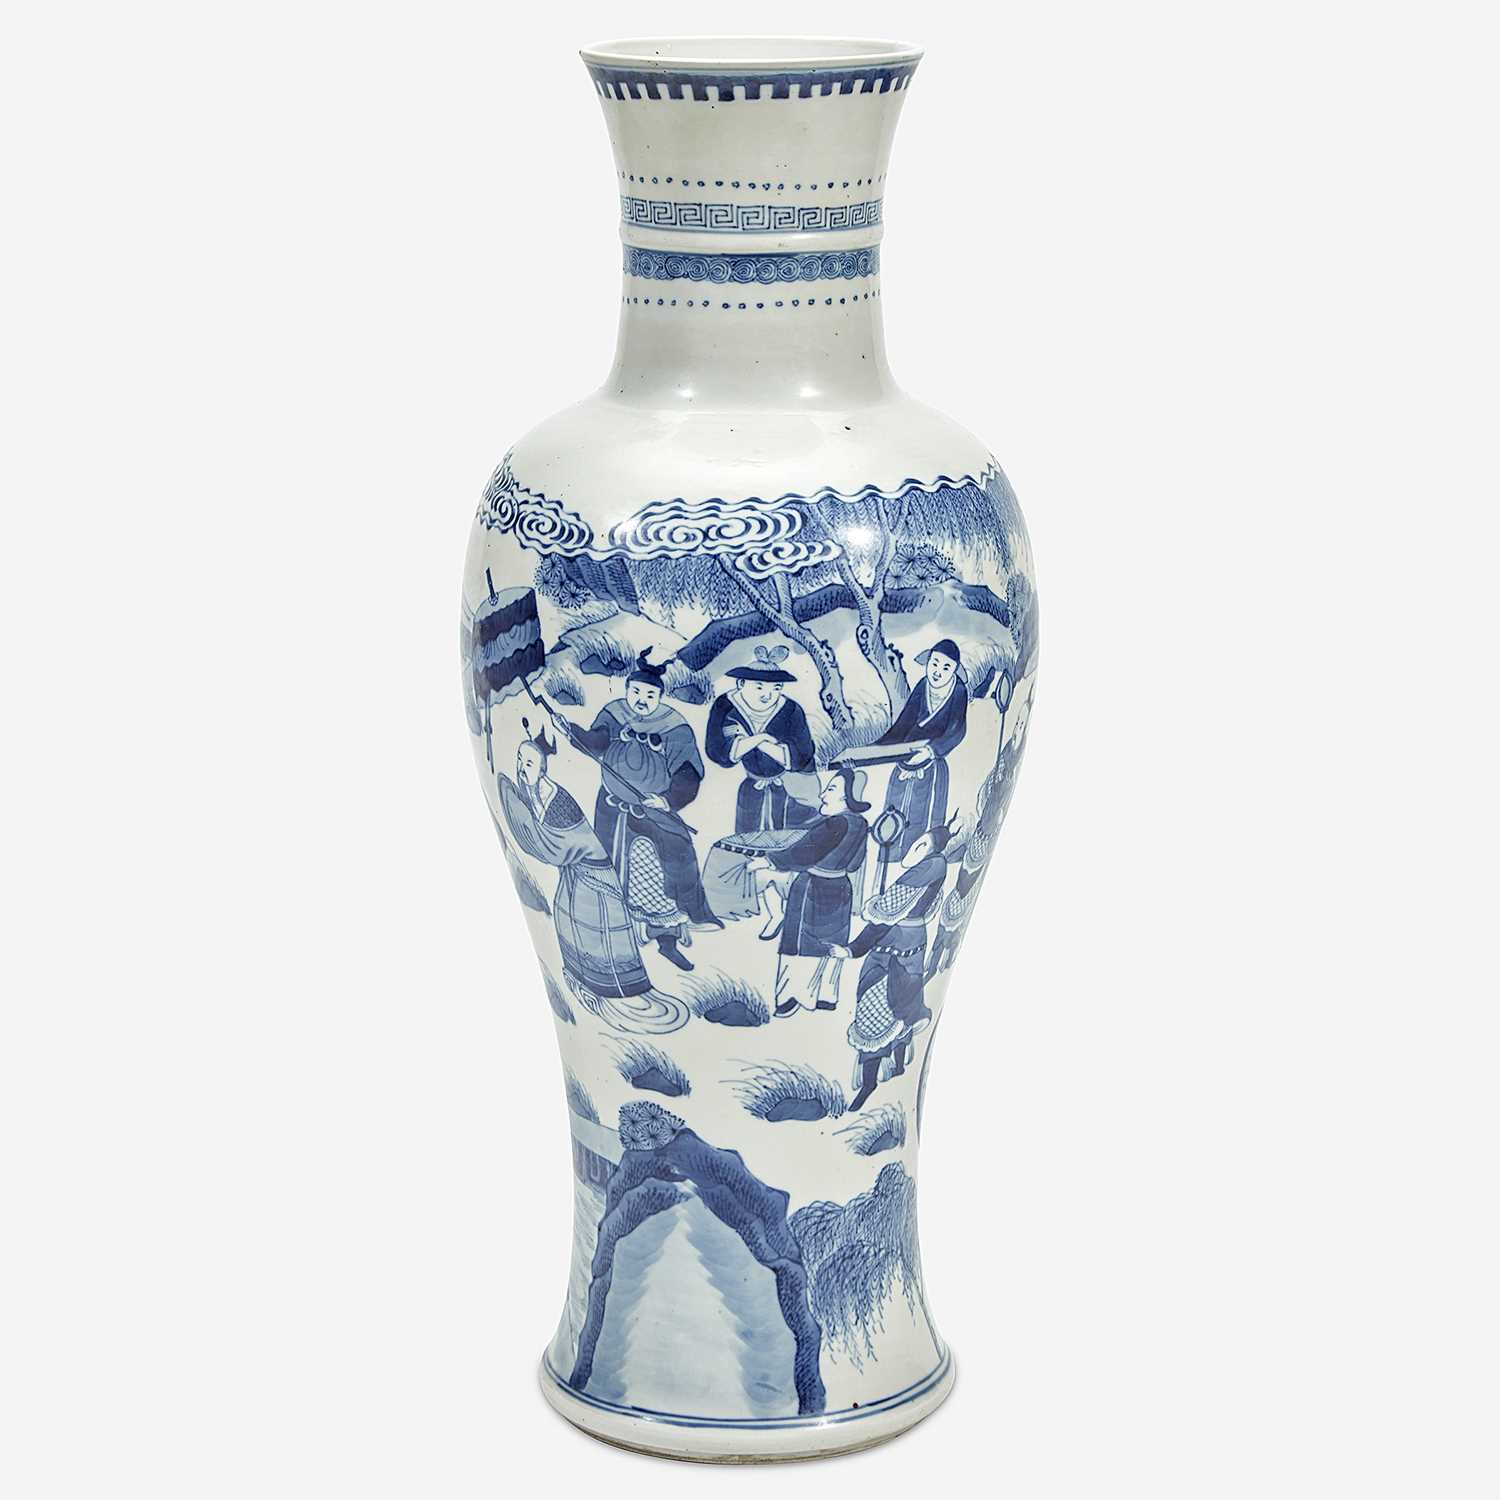 Lot 83 - A Chinese Blue and White Porcelain Tall Baluster Vase